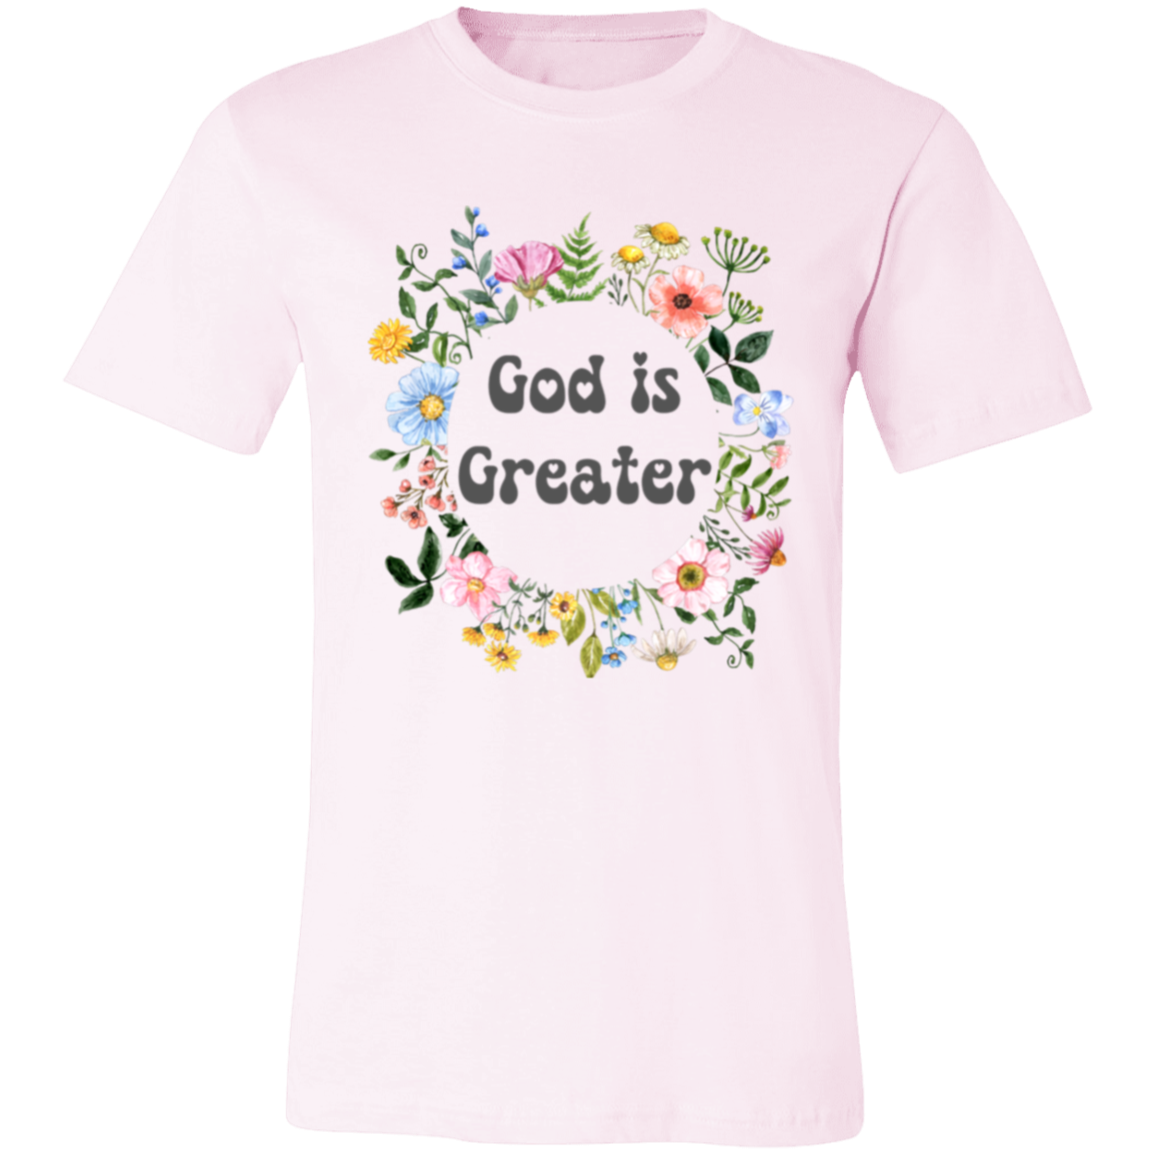 God is Greater- T-shirt